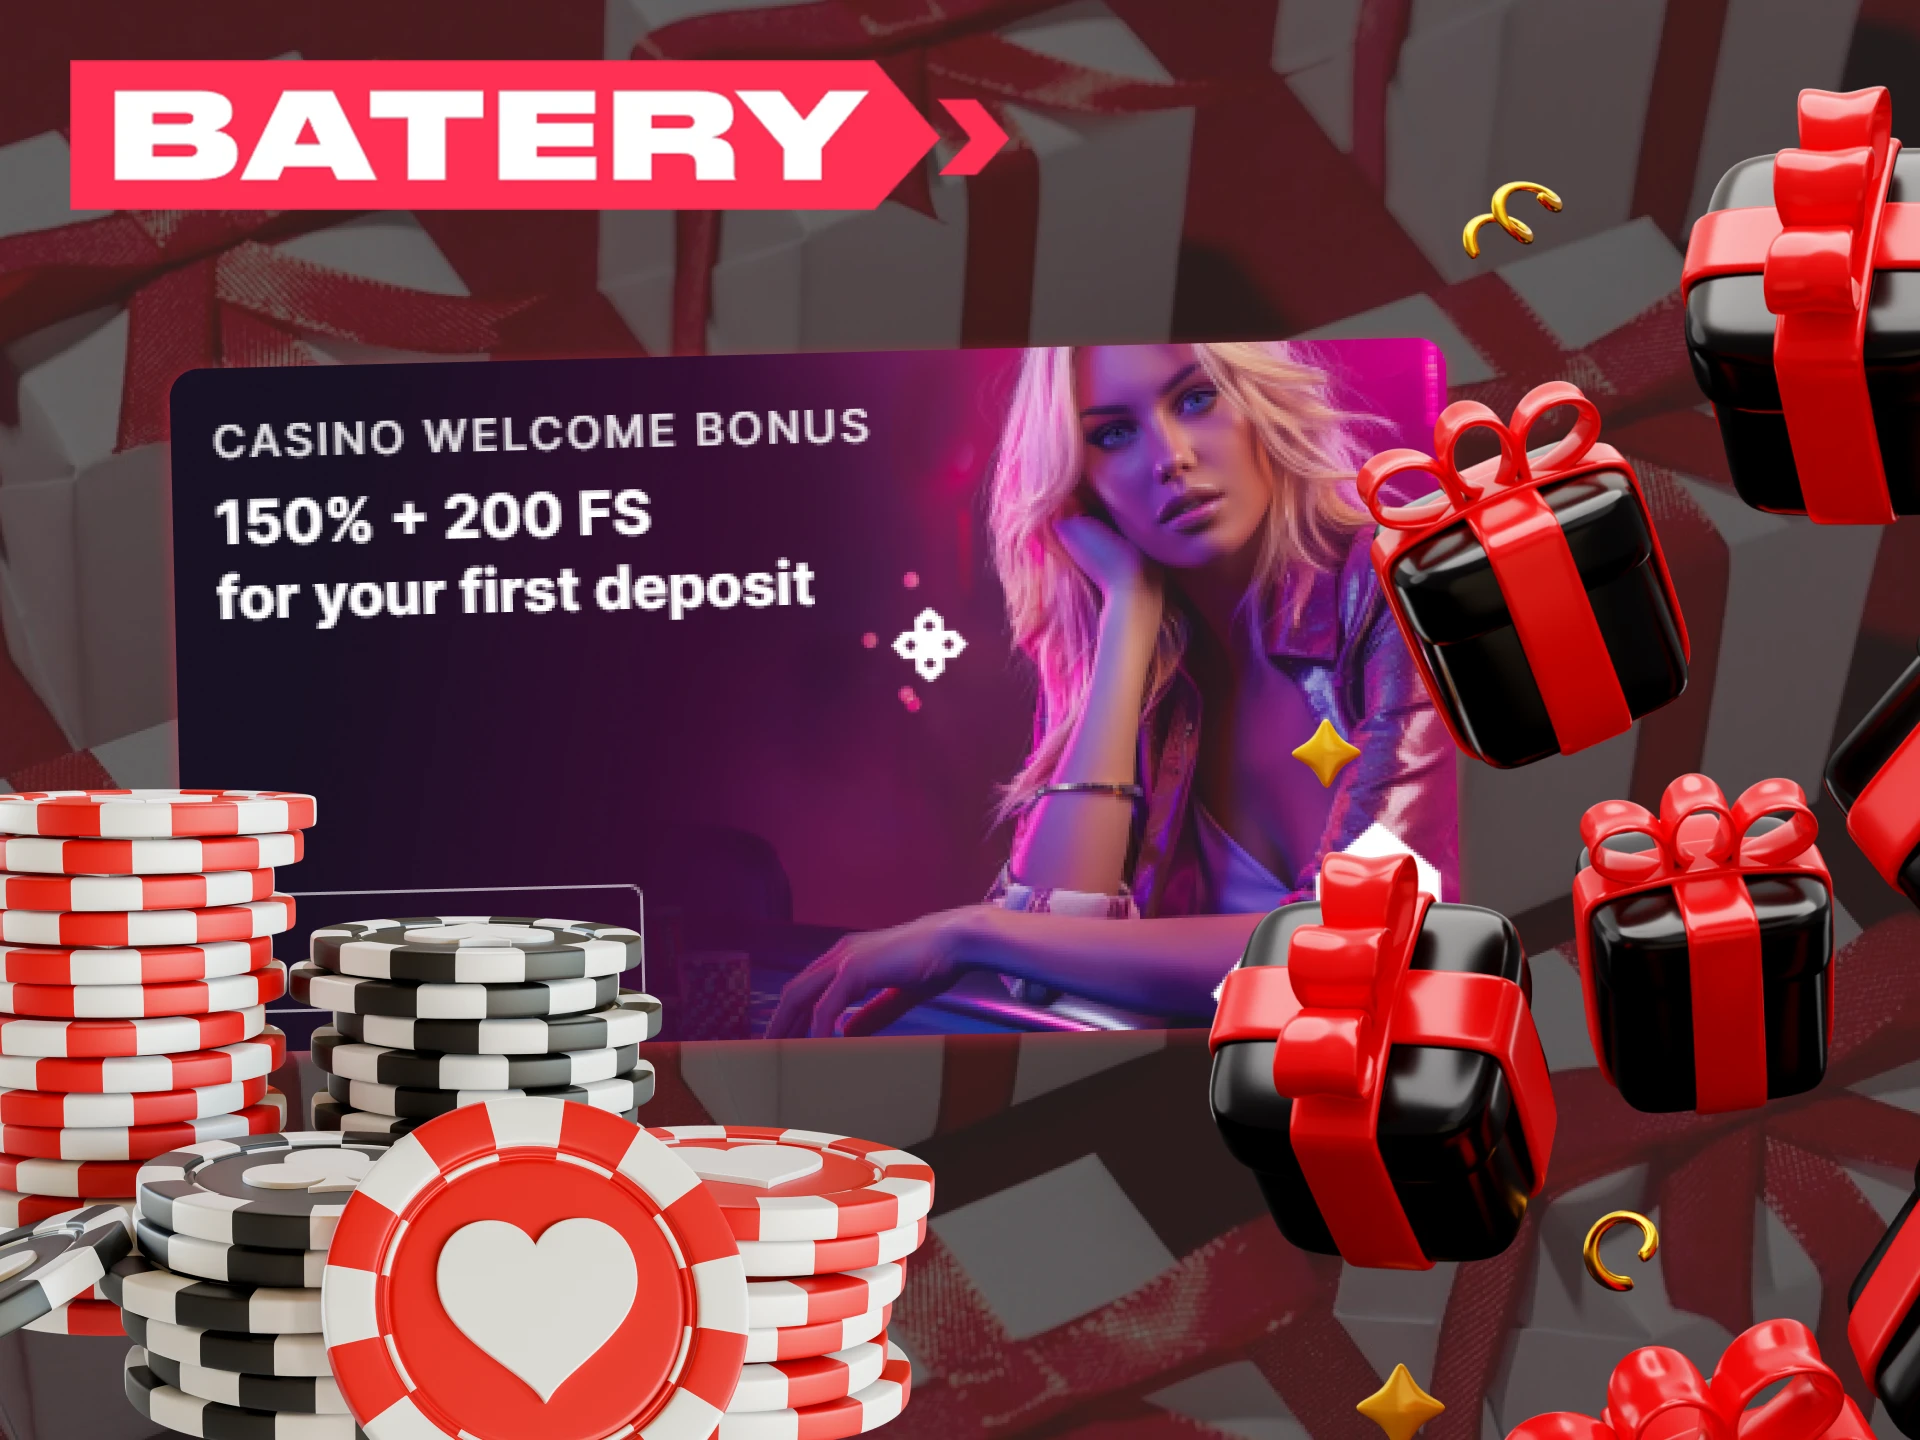 To receive the Batery casino welcome bonus, deposit money into your account.